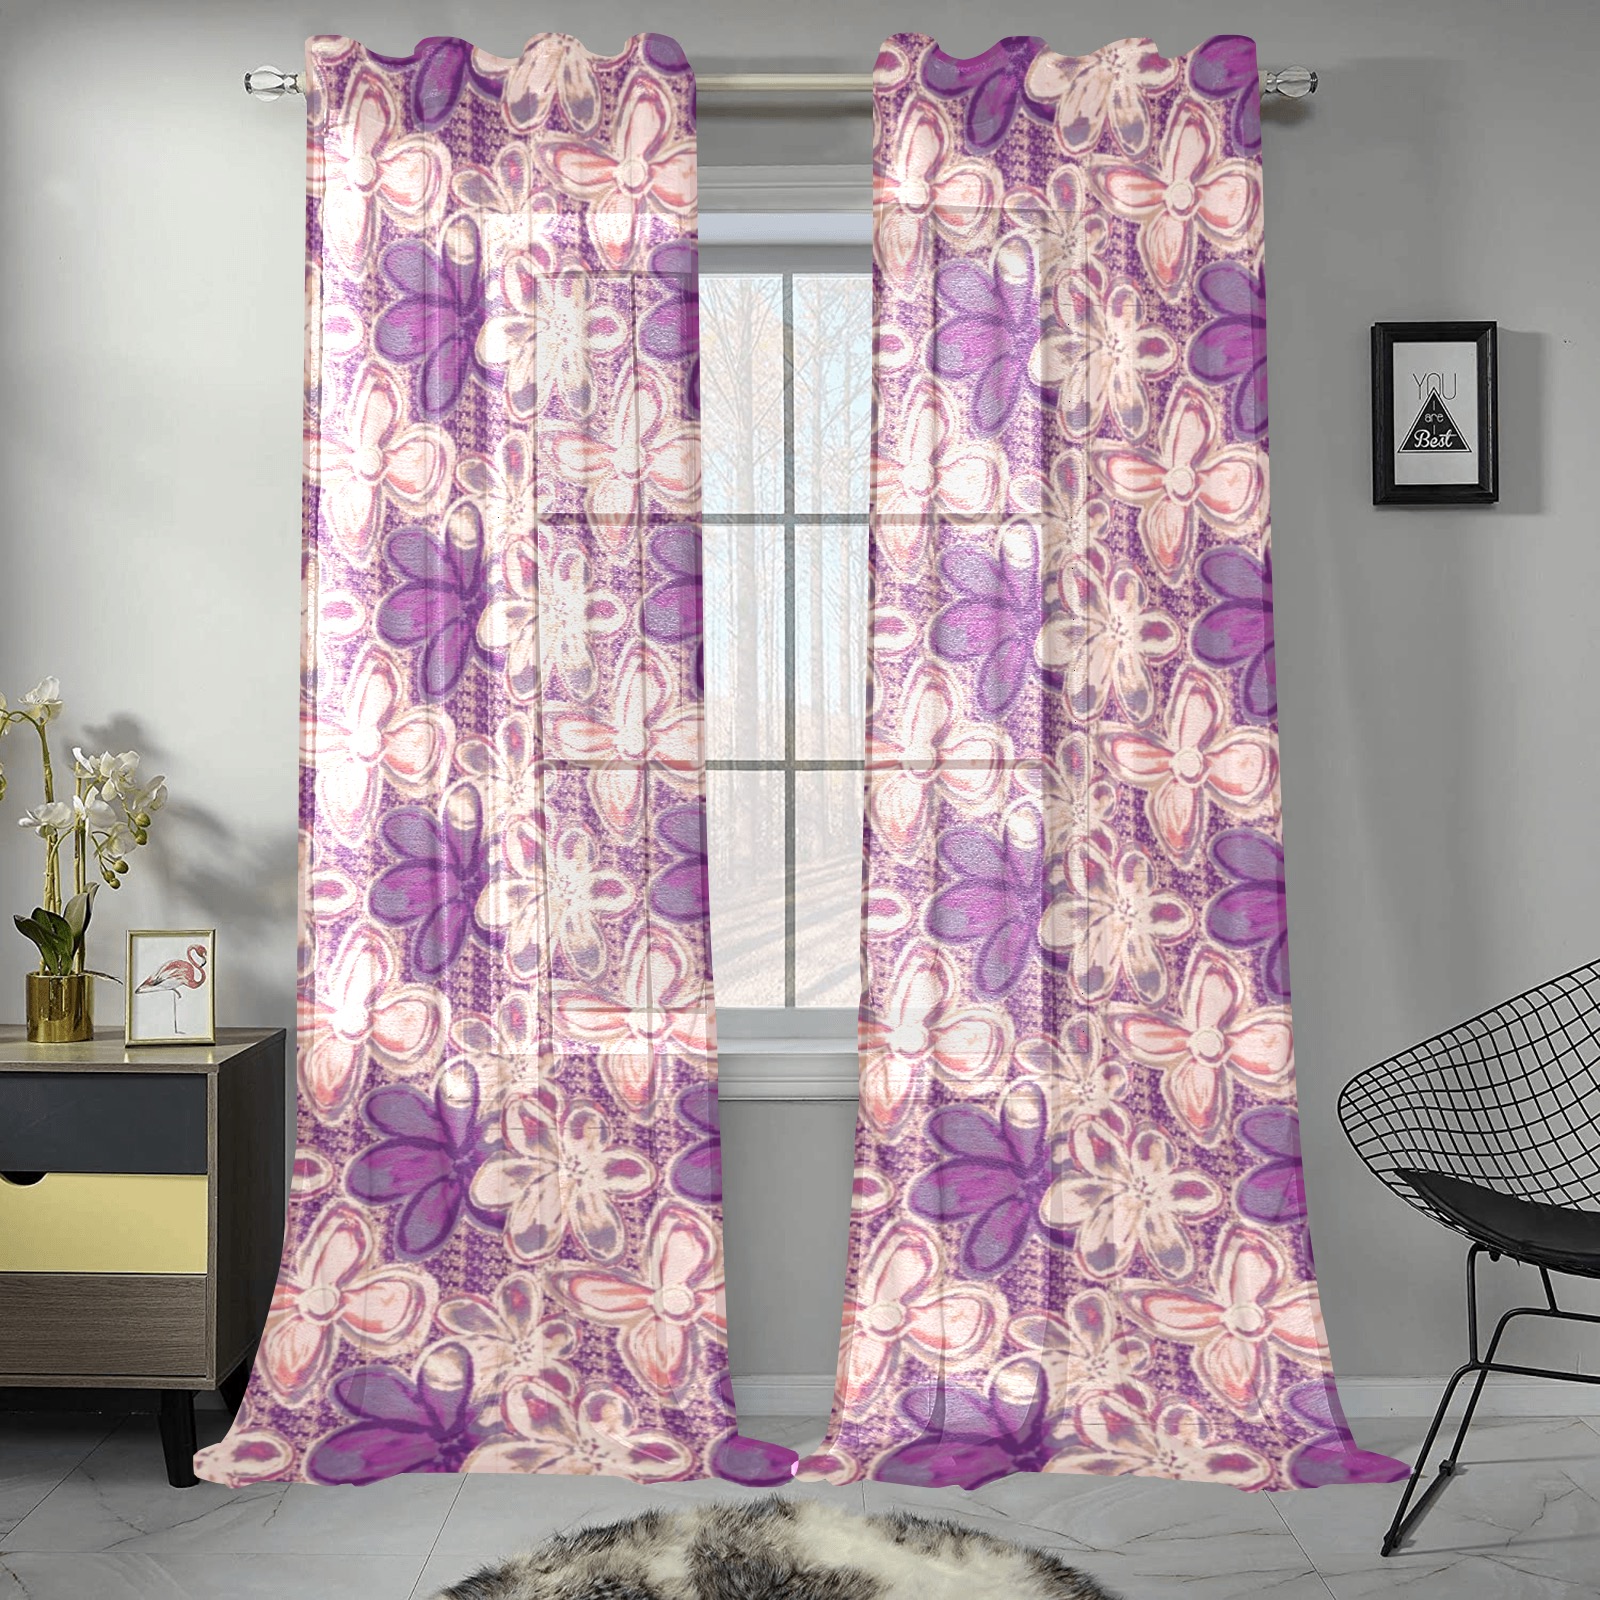 Fashionable floral Gauze Curtain 28"x95" (Two-Piece)